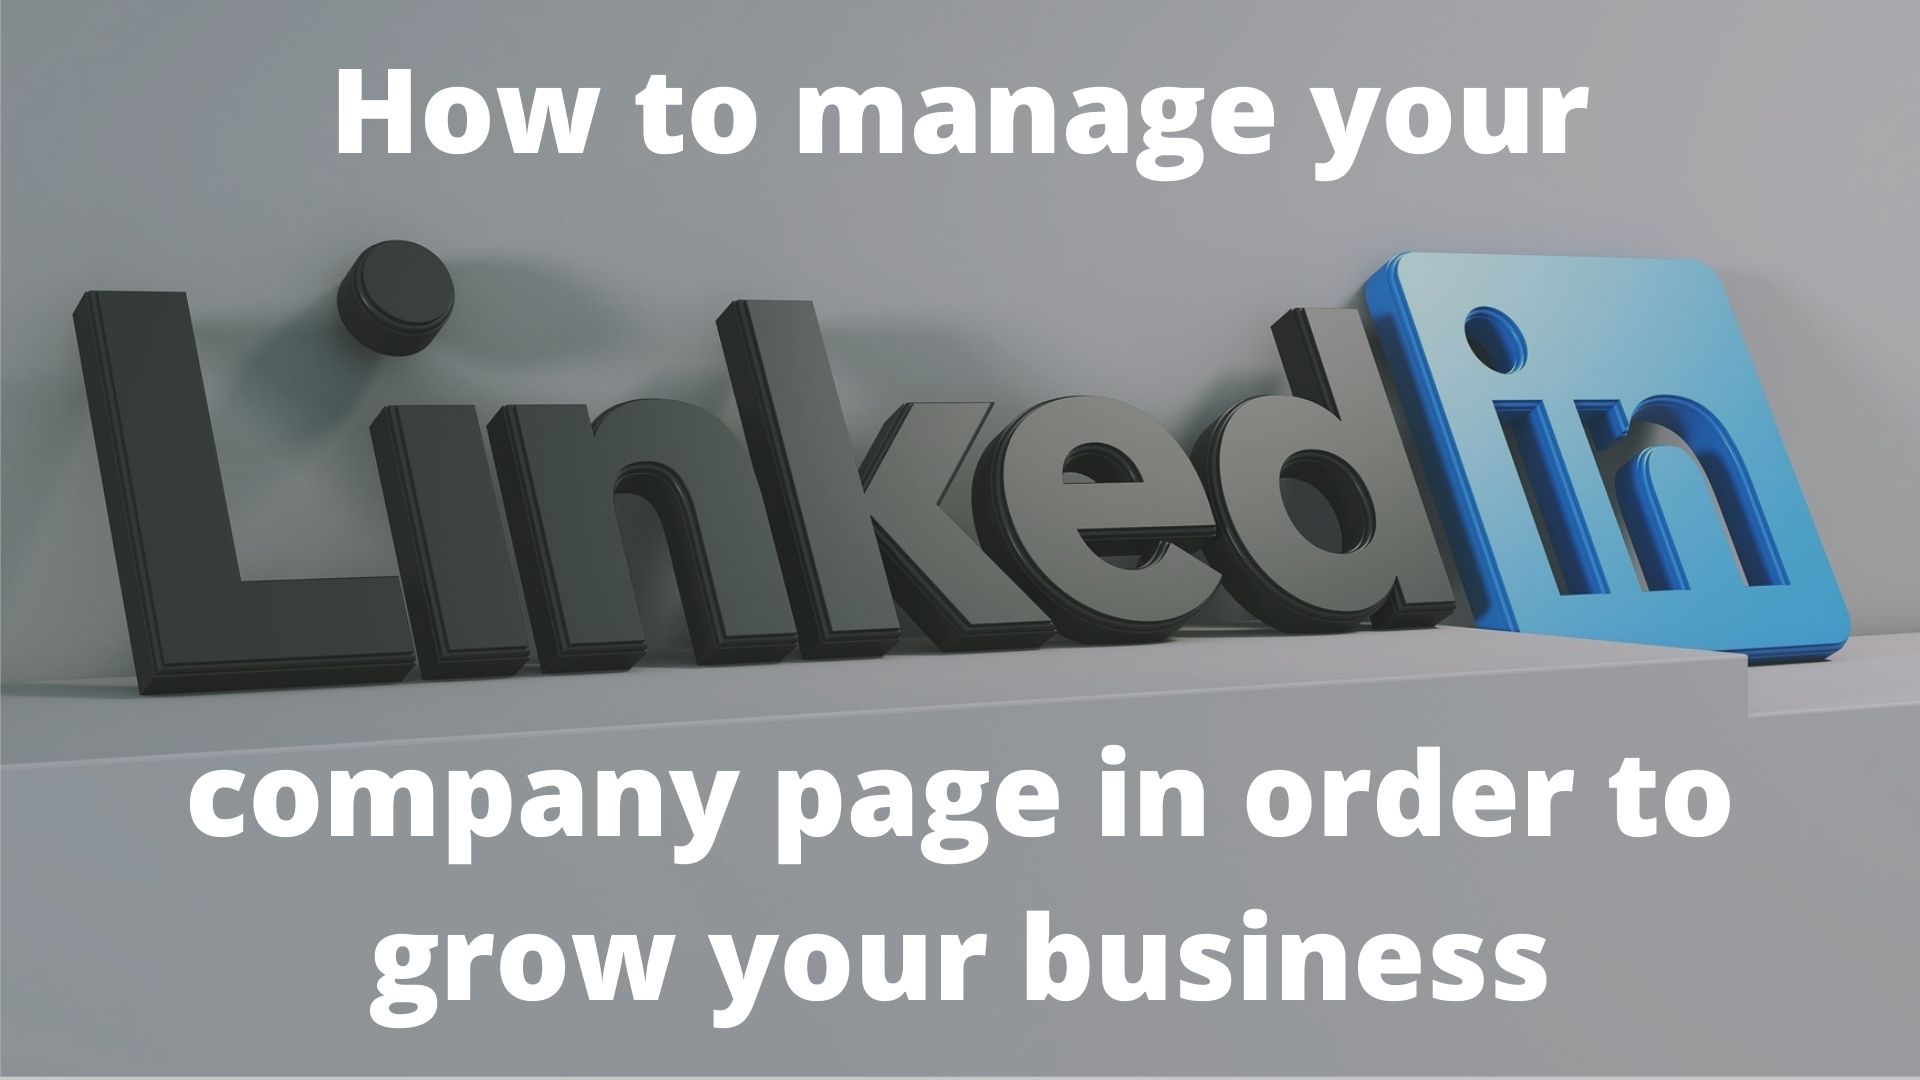 How to manage your LinkedIn company page in order to grow your business